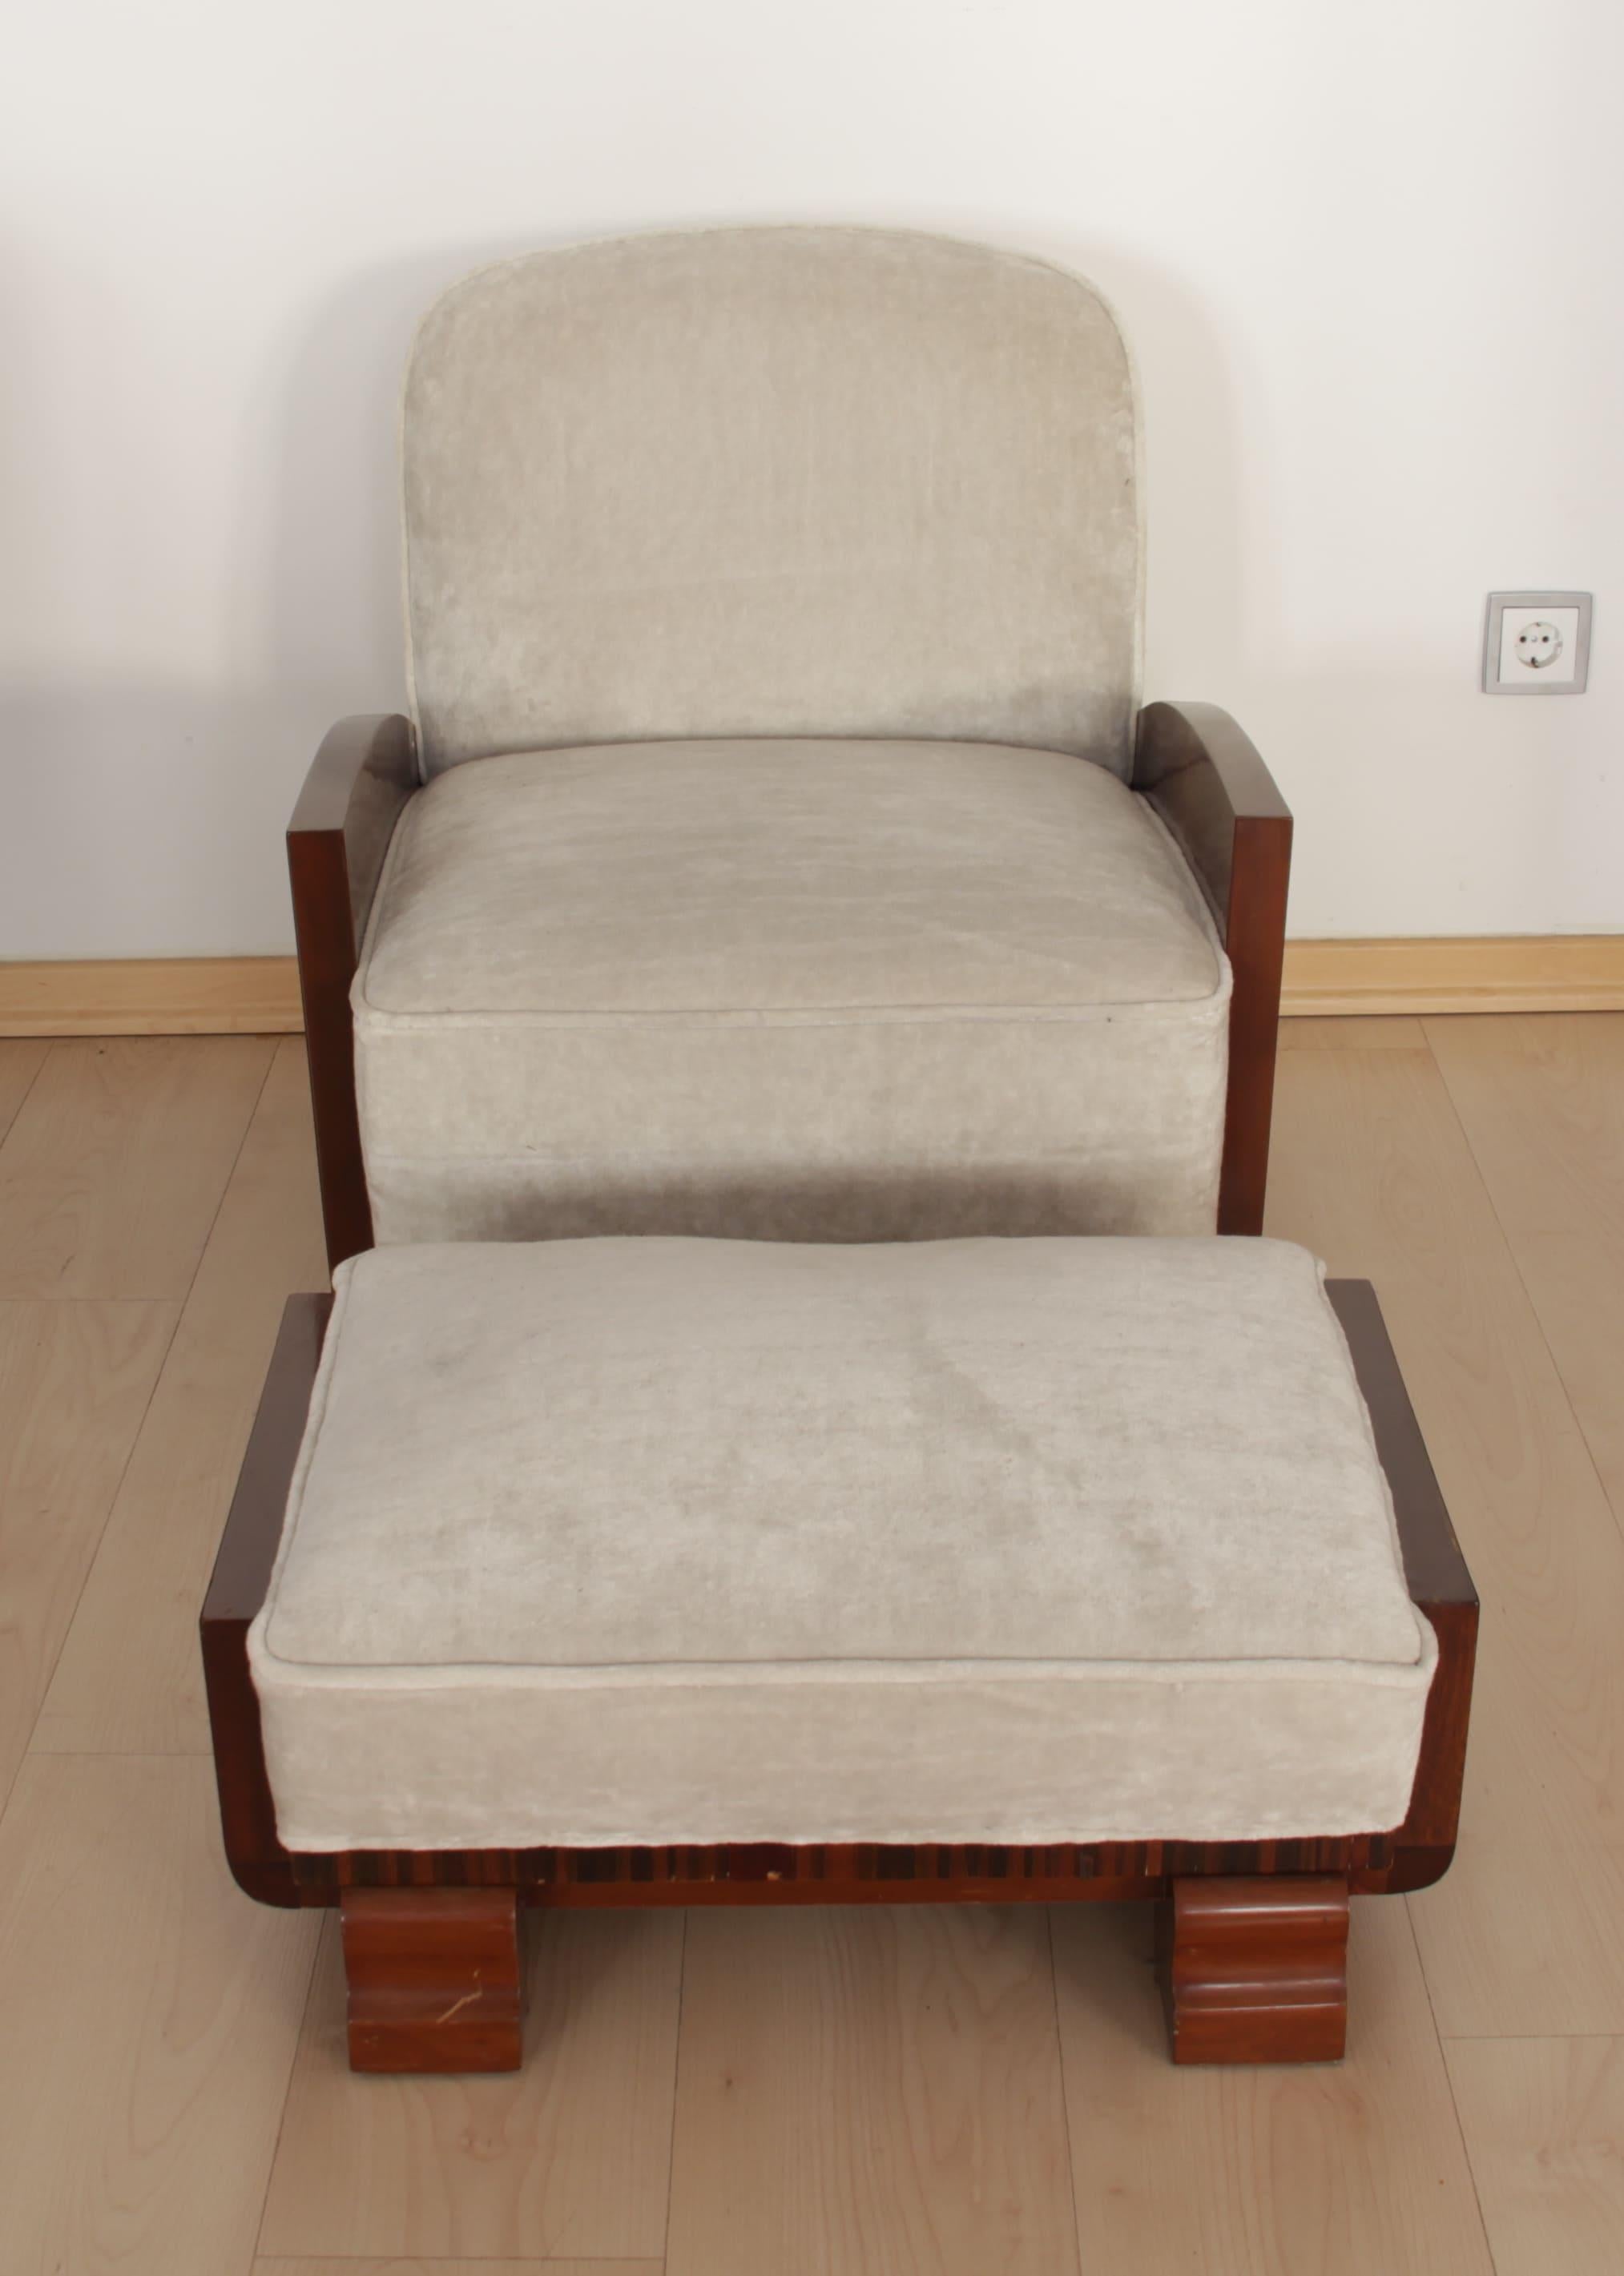 Petite Art Deco Club Chair with Ottoman

Wood: Mahogany and rosewood veneered, French polish
Fabric: Creme colored velvet with keder, newly upholstered.

Dimensions:
Chair: H 69, W 60, D 68 cm, H-Armrests 43, H-Seat 38 cm
Ottomane: H 28, W 62, D 46